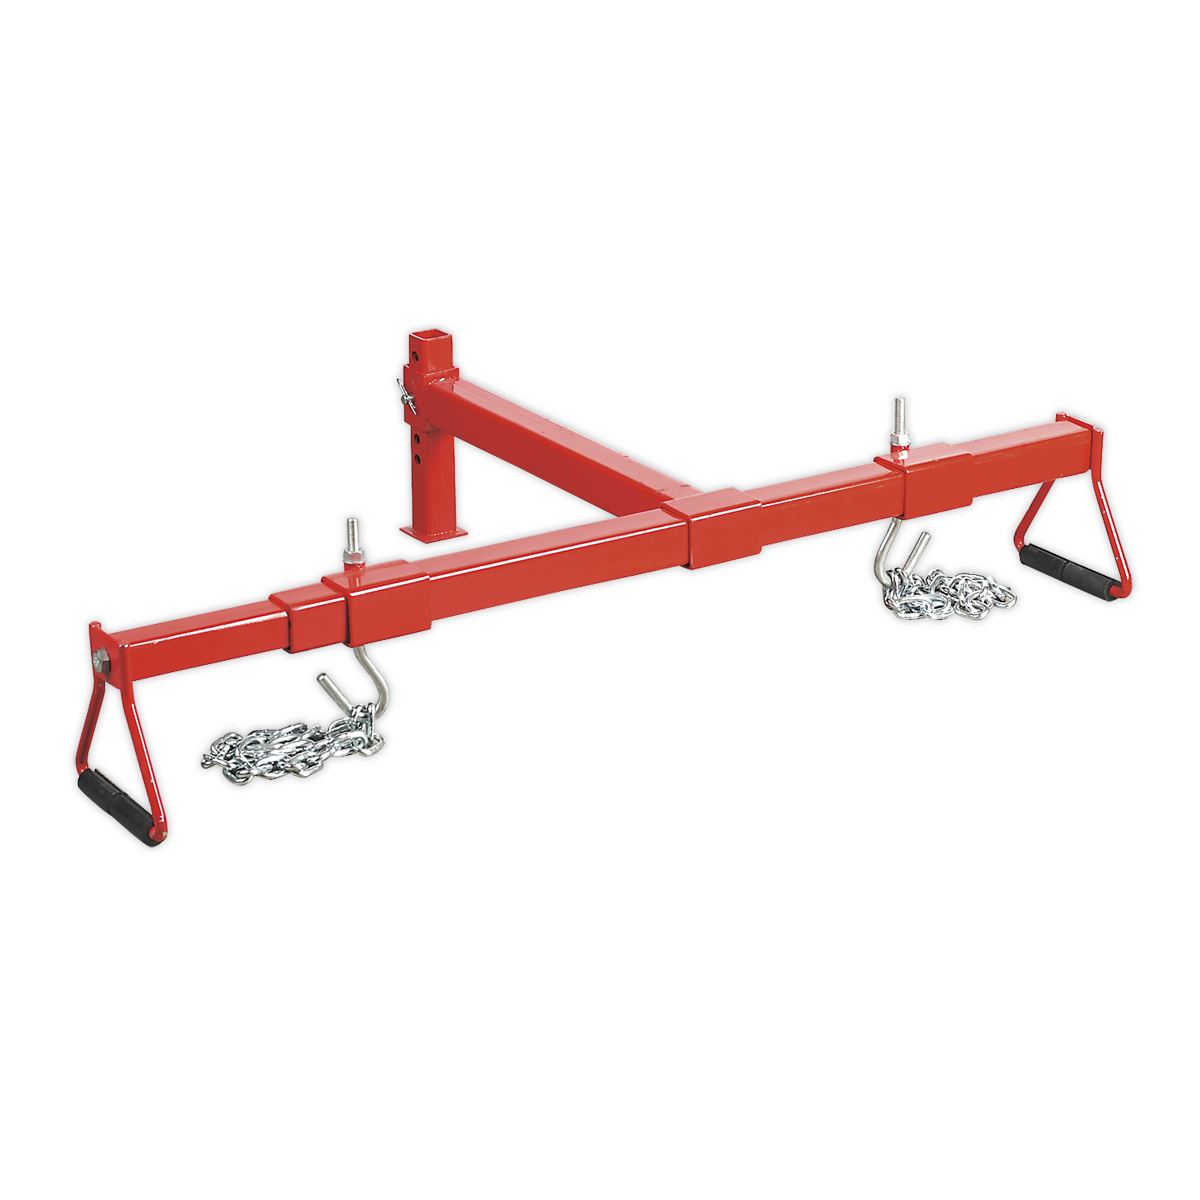 Sealey Engine Support Beam 600kg Heavy-Duty